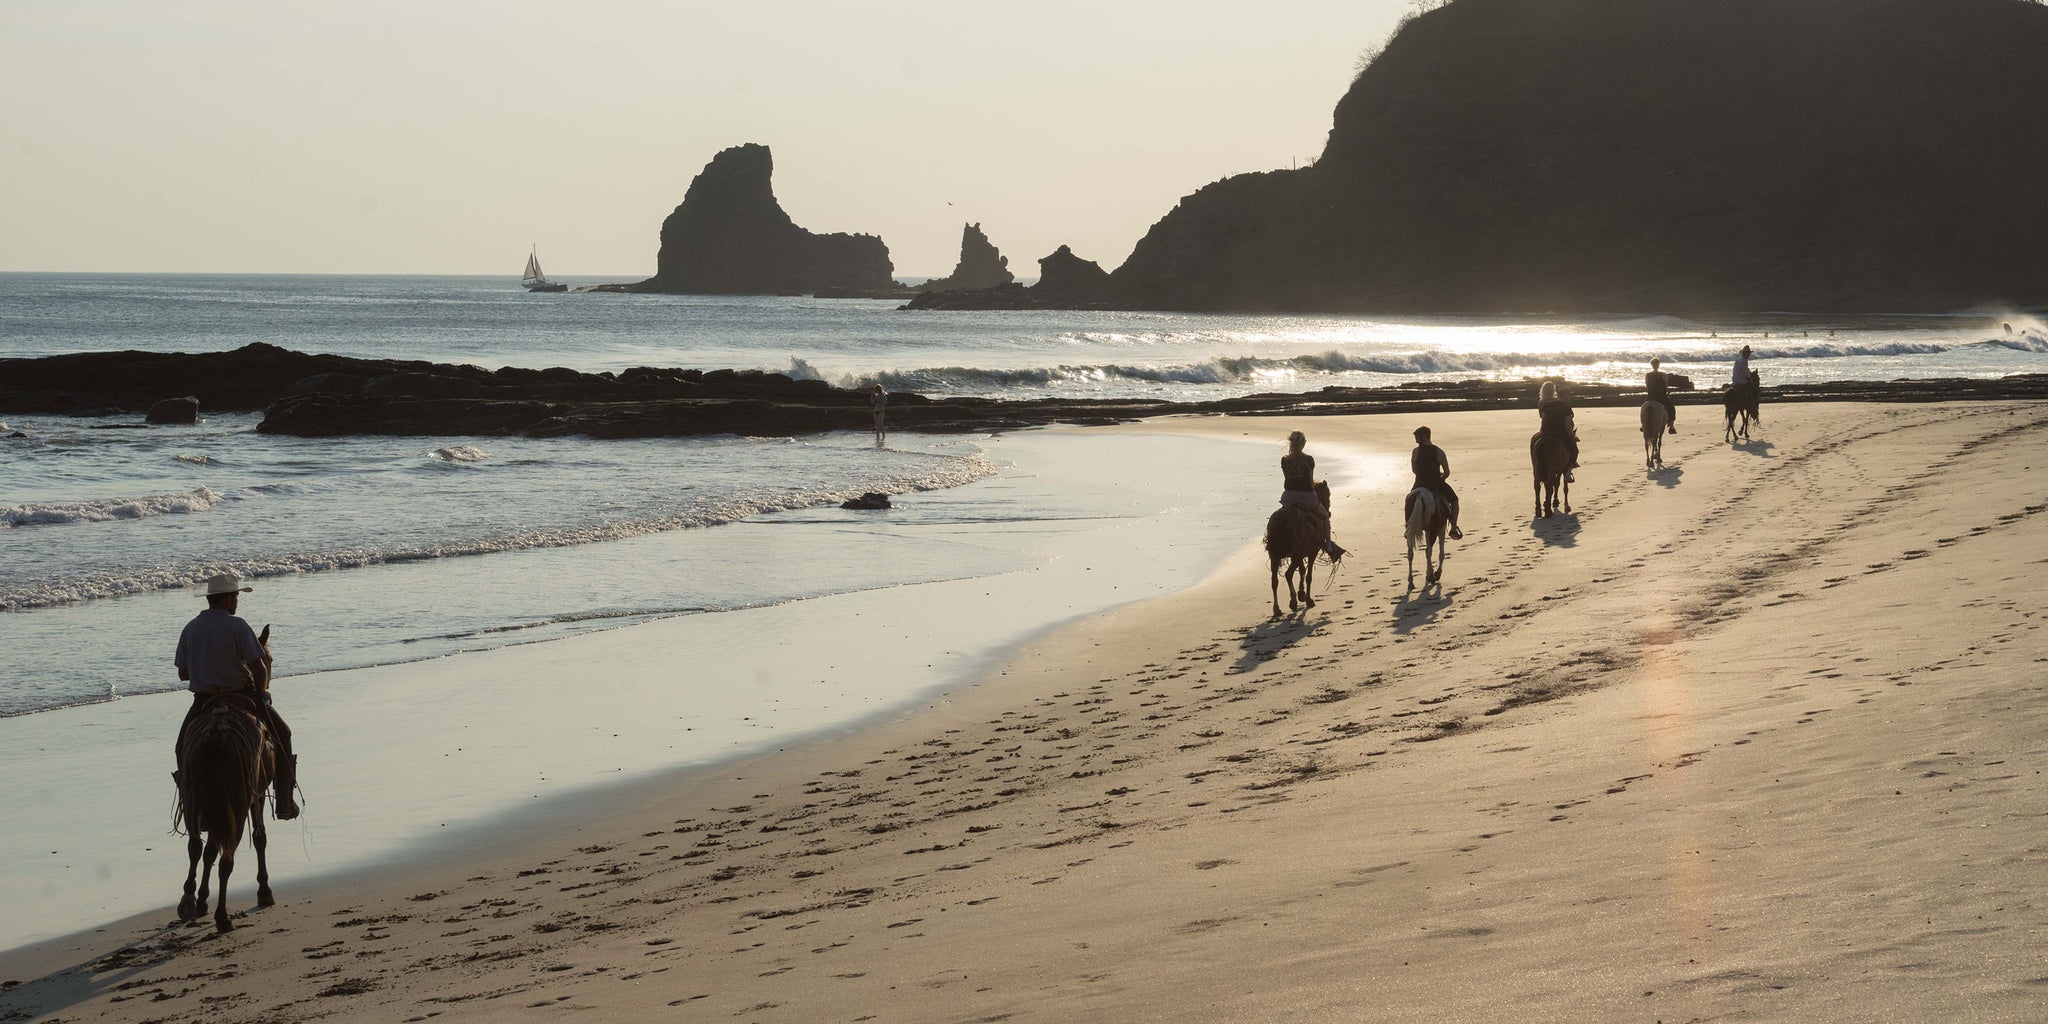 Bather - Excellent Adventures - Horseback riding in Nicaragua on the beach